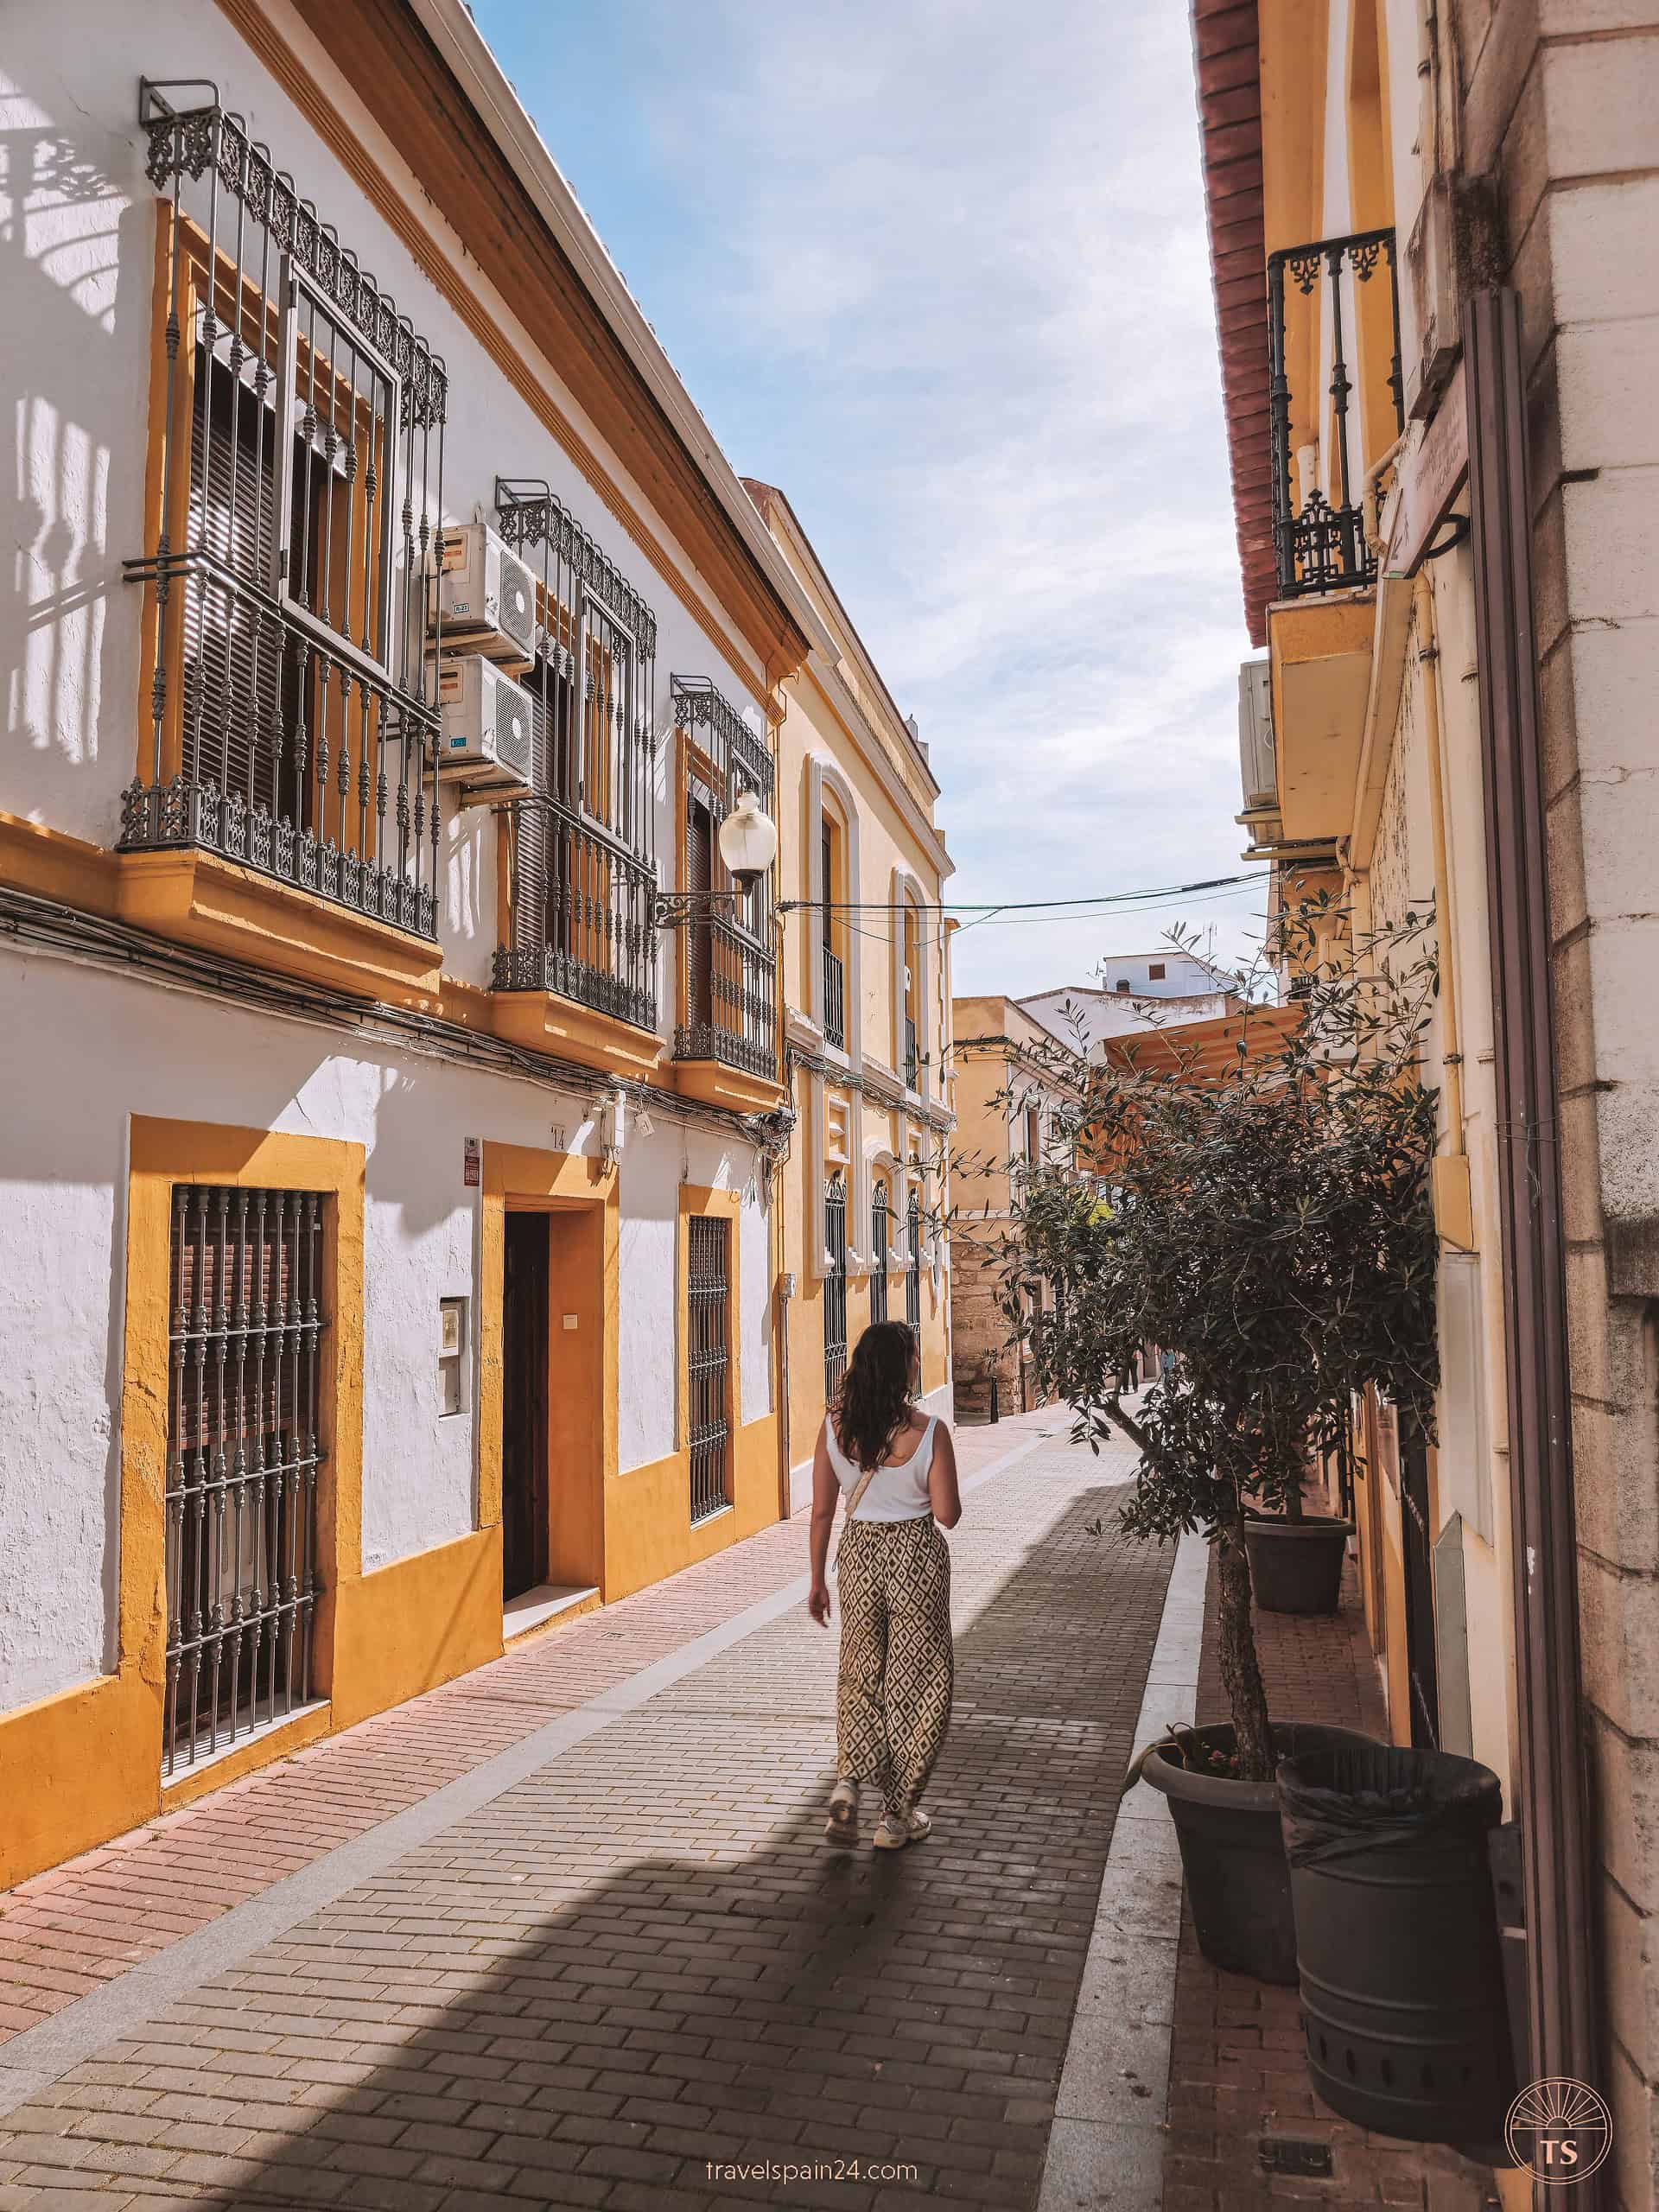 Filipa Ferreira strolling through the vibrant streets of Mérida, with yellow doors and balconies and olive trees lining the way, under a light blue sky, capturing the quaint charm of the city